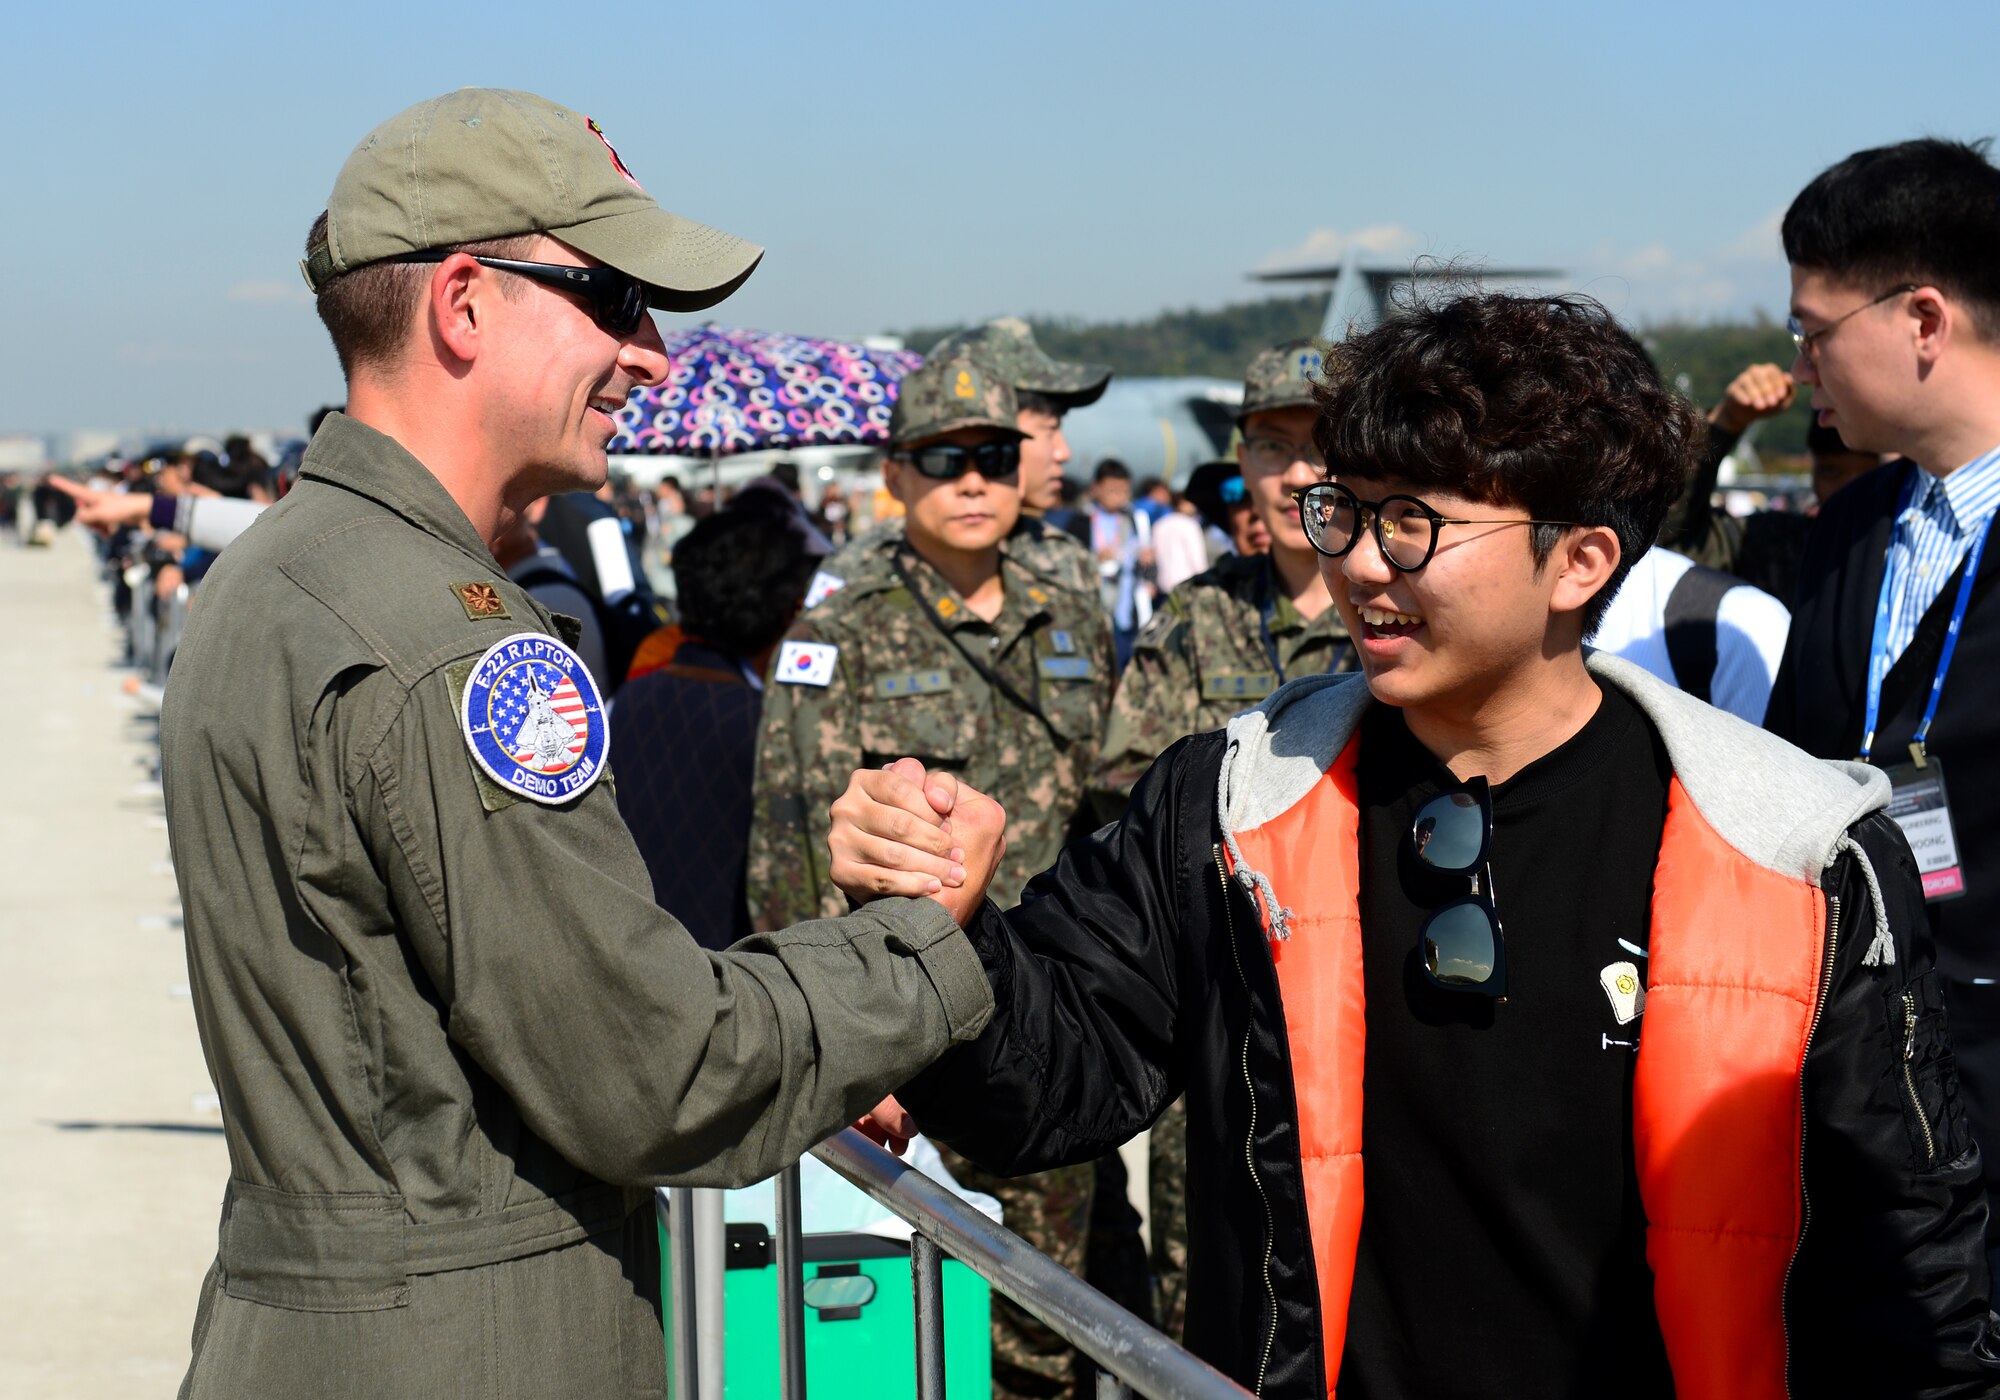 U.S. Air Force Maj. Dan “Rock” Dickinson, Air Combat Command F-22 Raptor Demonstration Team pilot, shakes the hand of an enthusiastic fan after his performance at the Seoul International Aerospace and Defense Exhibition 2017 at the Seoul Airport, Republic of Korea, Oct. 20, 2017. The Seoul ADEX is the largest, most comprehensive event of its kind in Northeast Asia, attracting aviation and aerospace professionals, key defense personnel, aviation enthusiasts and the general public alike. (U.S. Air Force photo by Staff Sgt. Alex Fox Echols III)